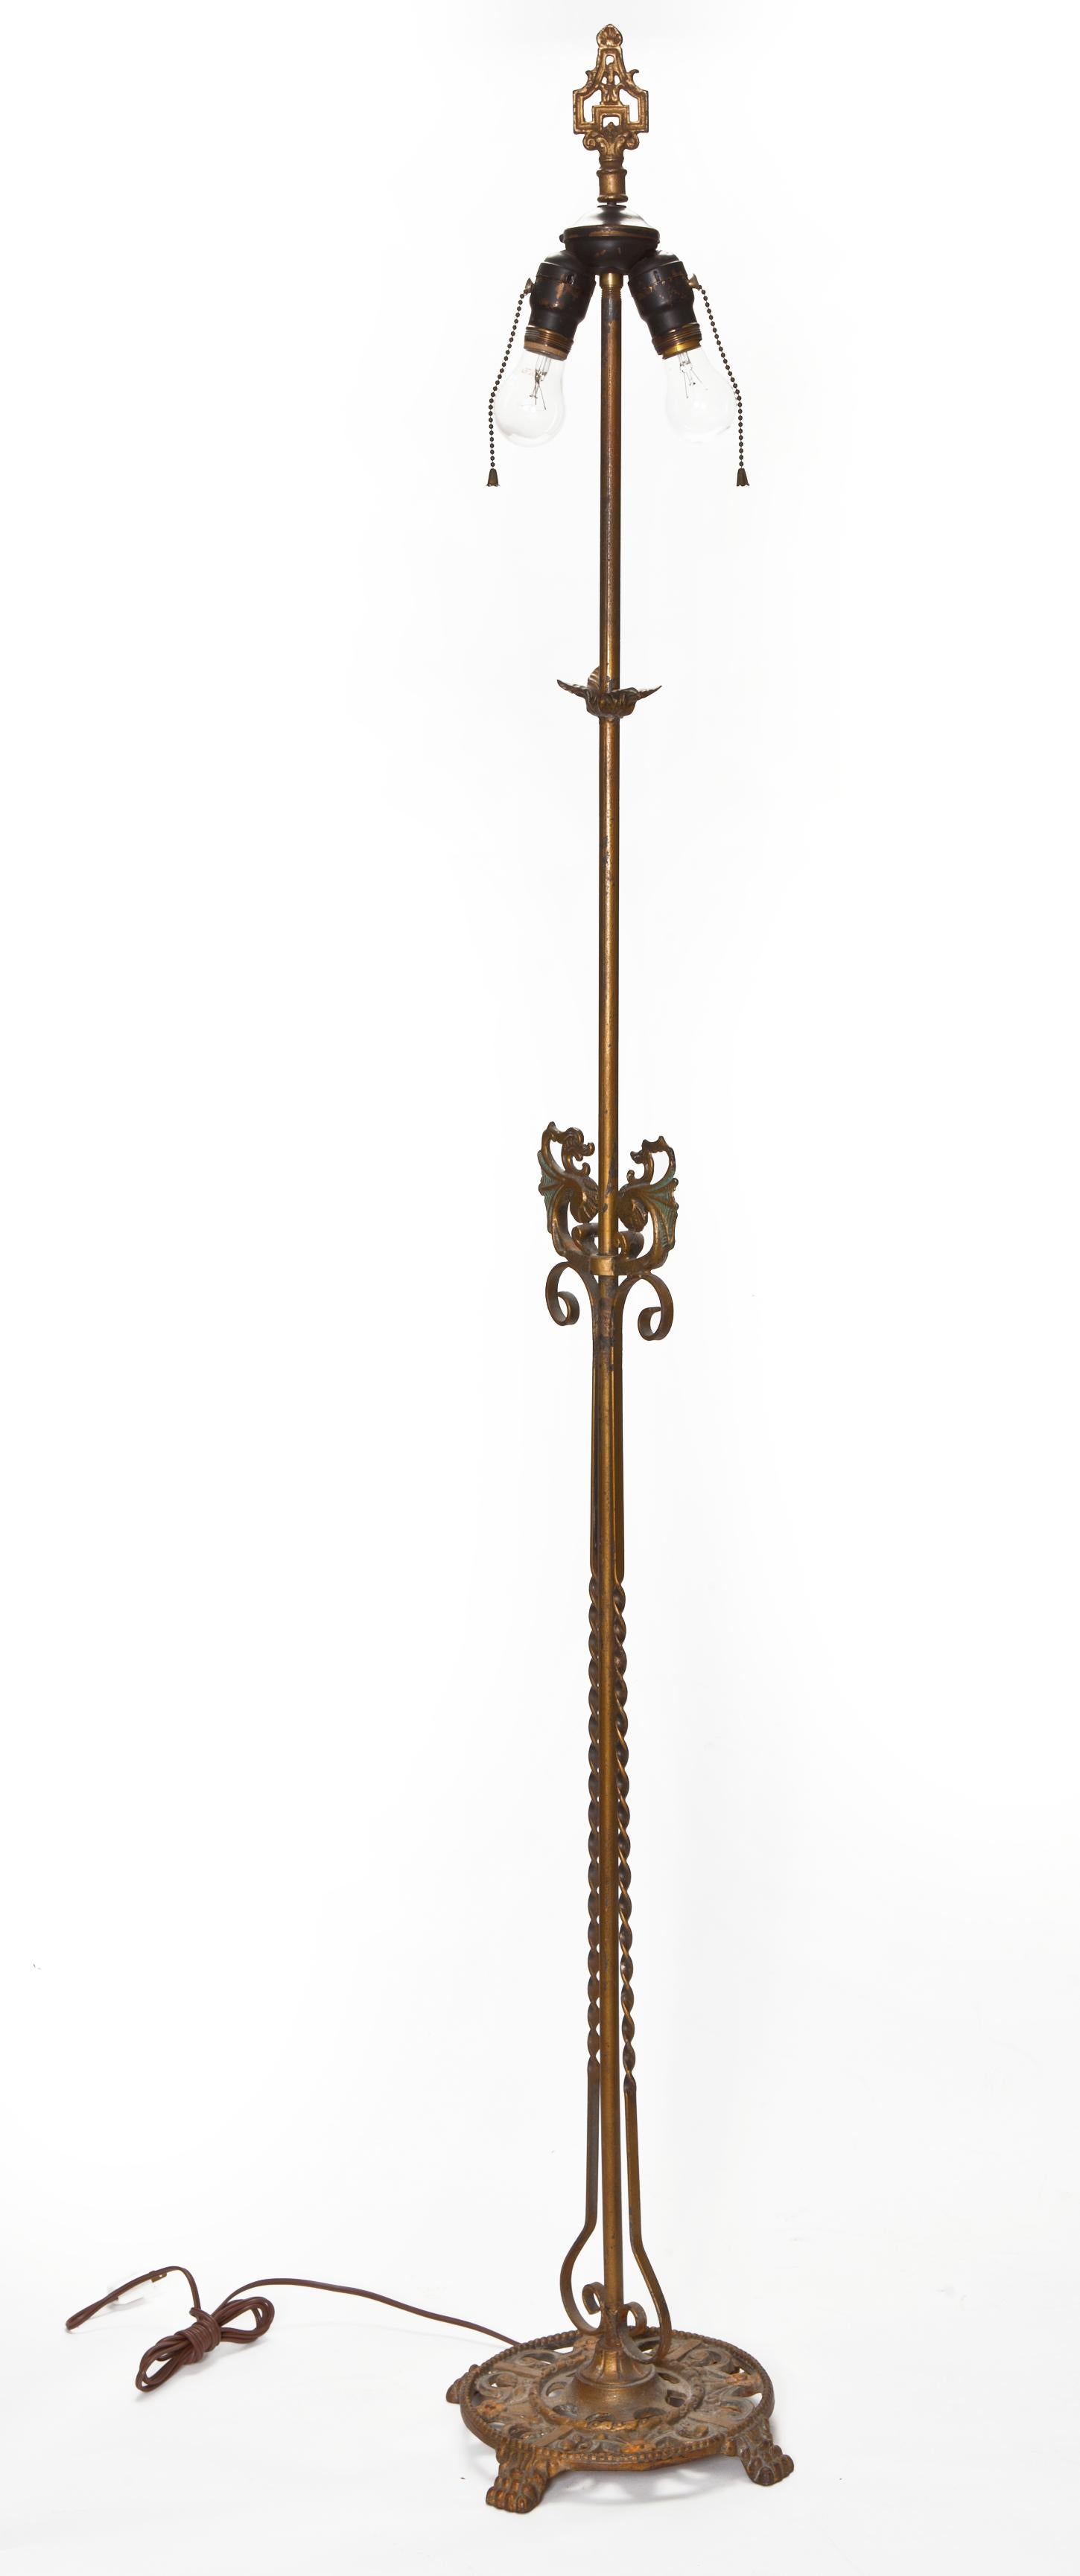 Classic 1920’s wrought iron floor lamp. All original surfaces. Re-wired solid brass sockets, standard bulbs recommended. Lamp has pull chain for two directional sockets. New classic burlap shade is included. 
Measures: Shade is 11